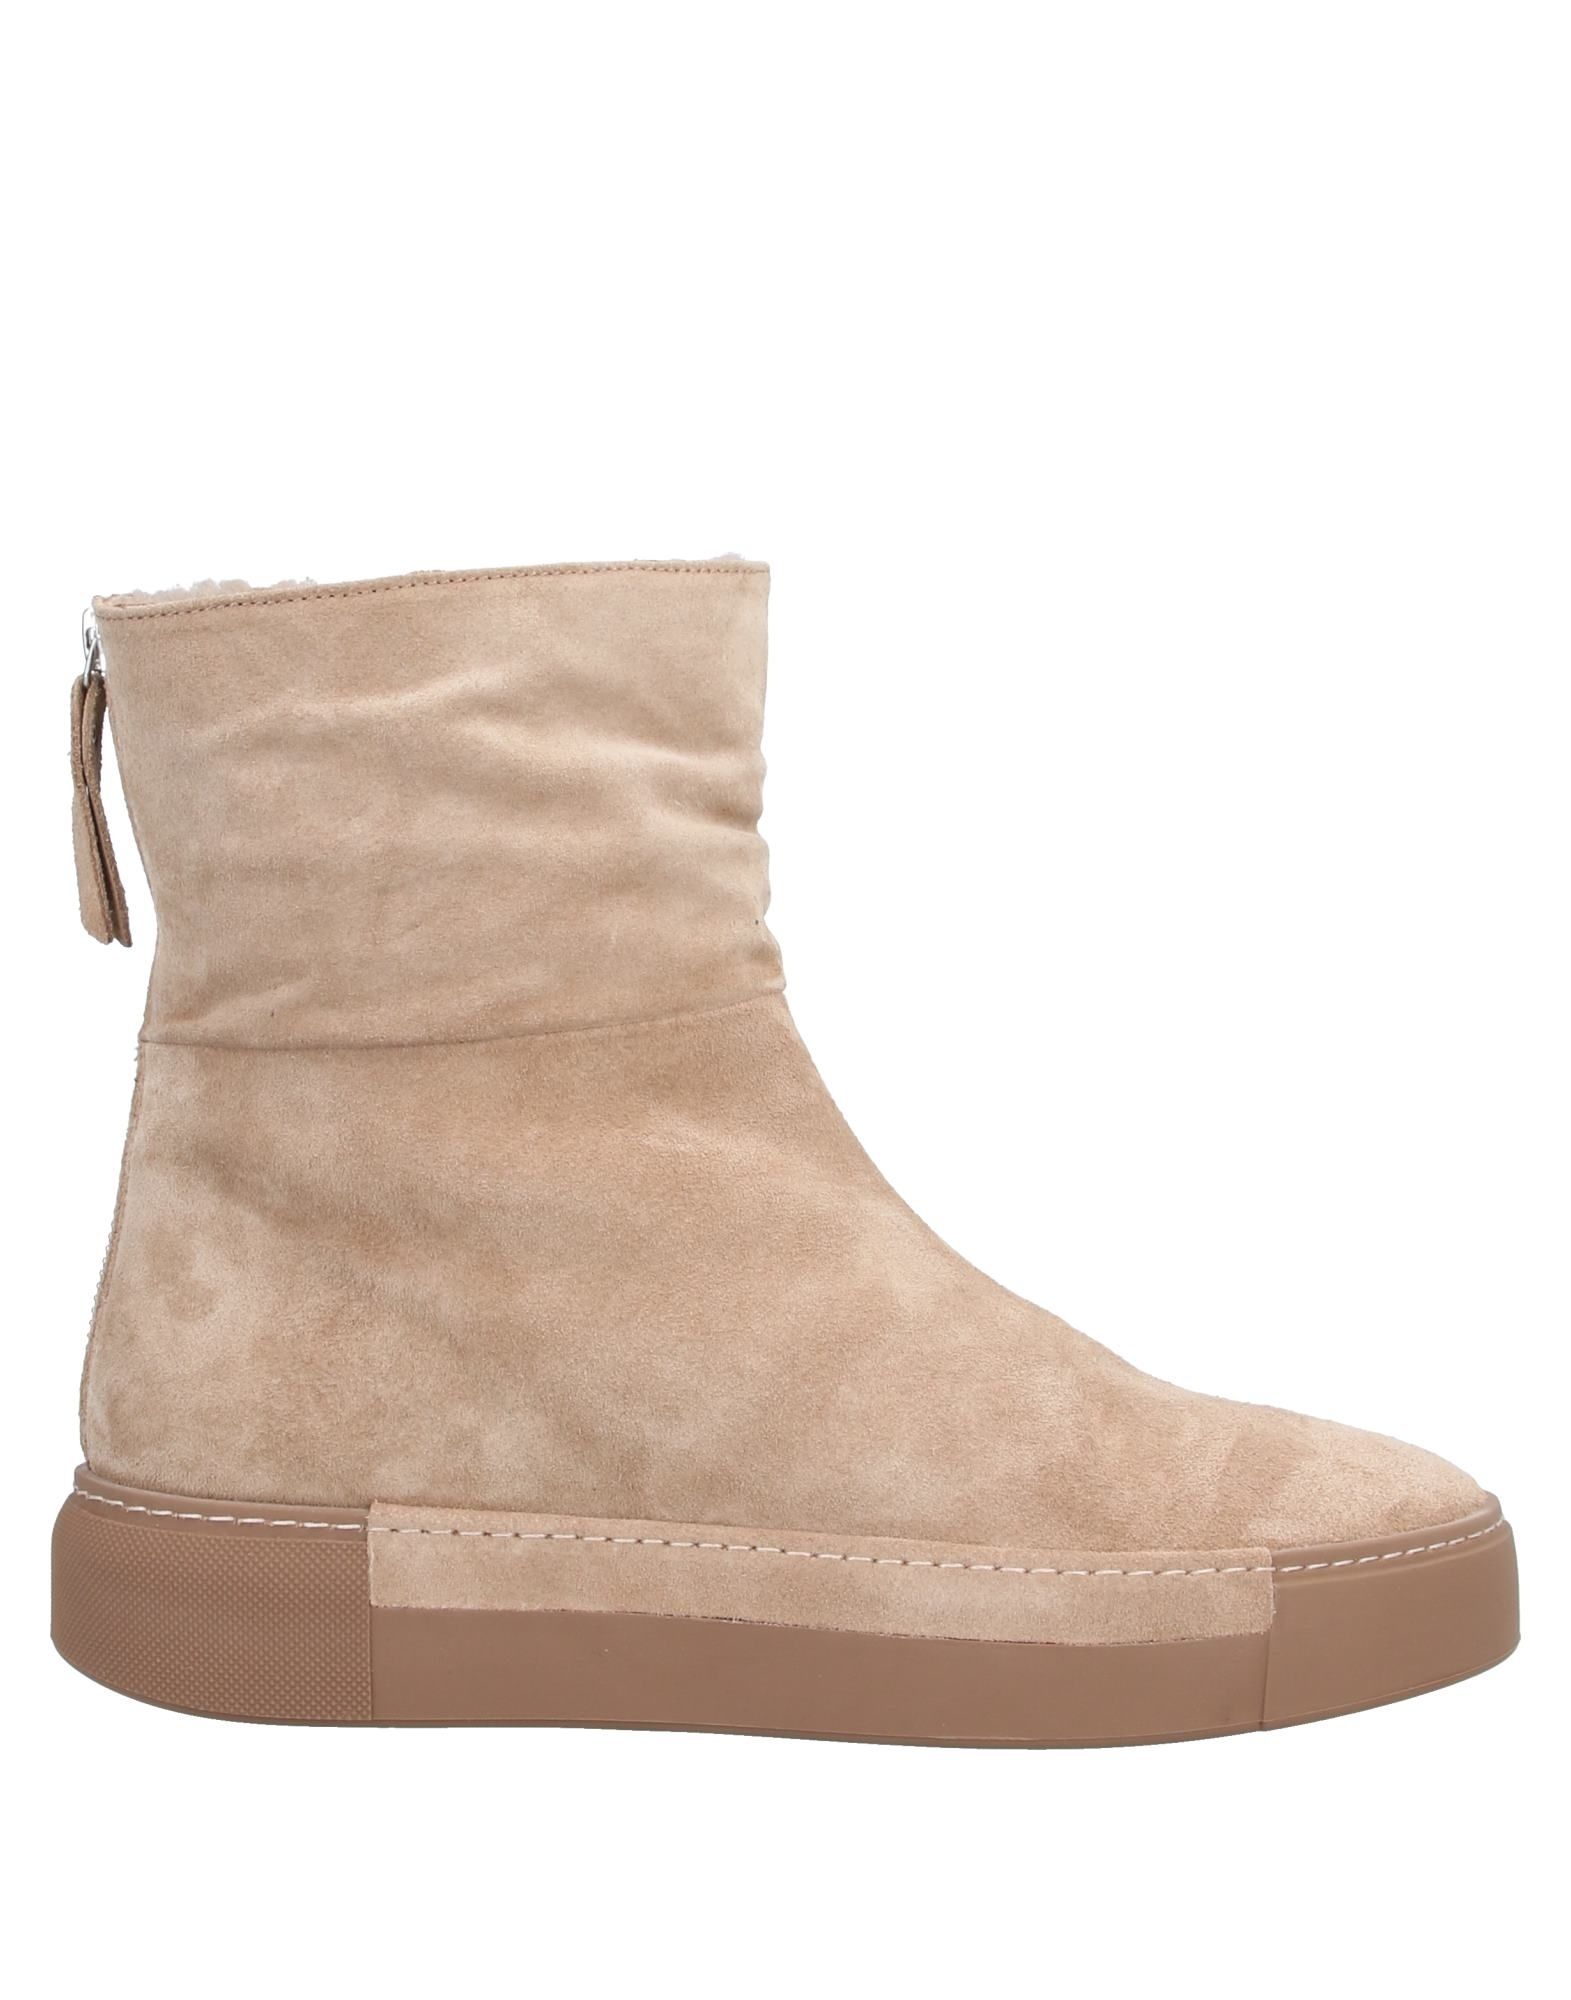 VIC MATIE Ankle boots - Item 11745660